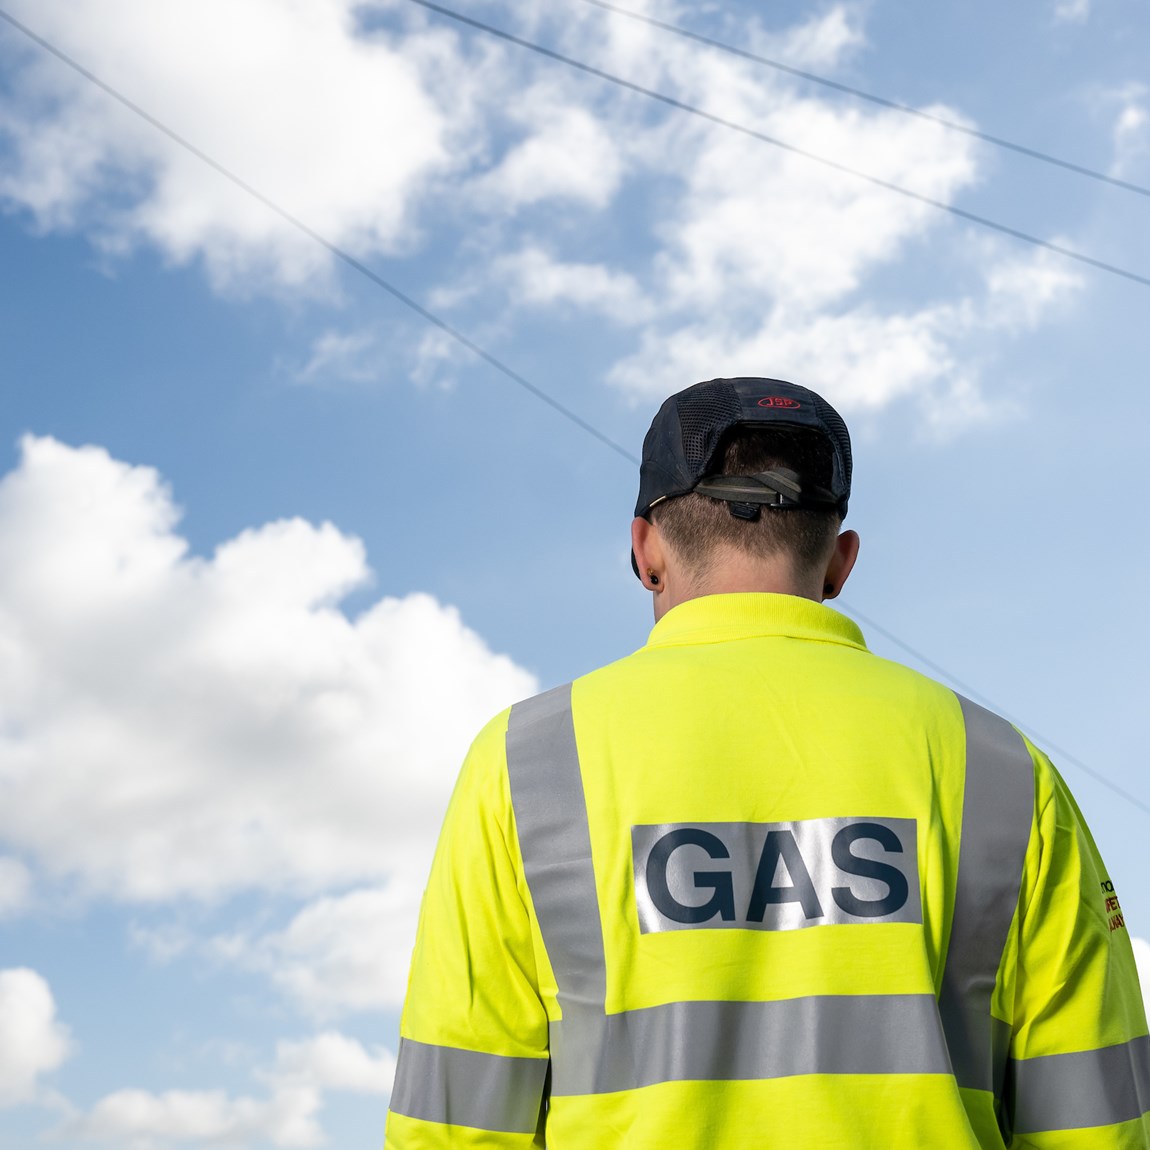 2017 sees more than £7.7million invested in Bristol’s gas network